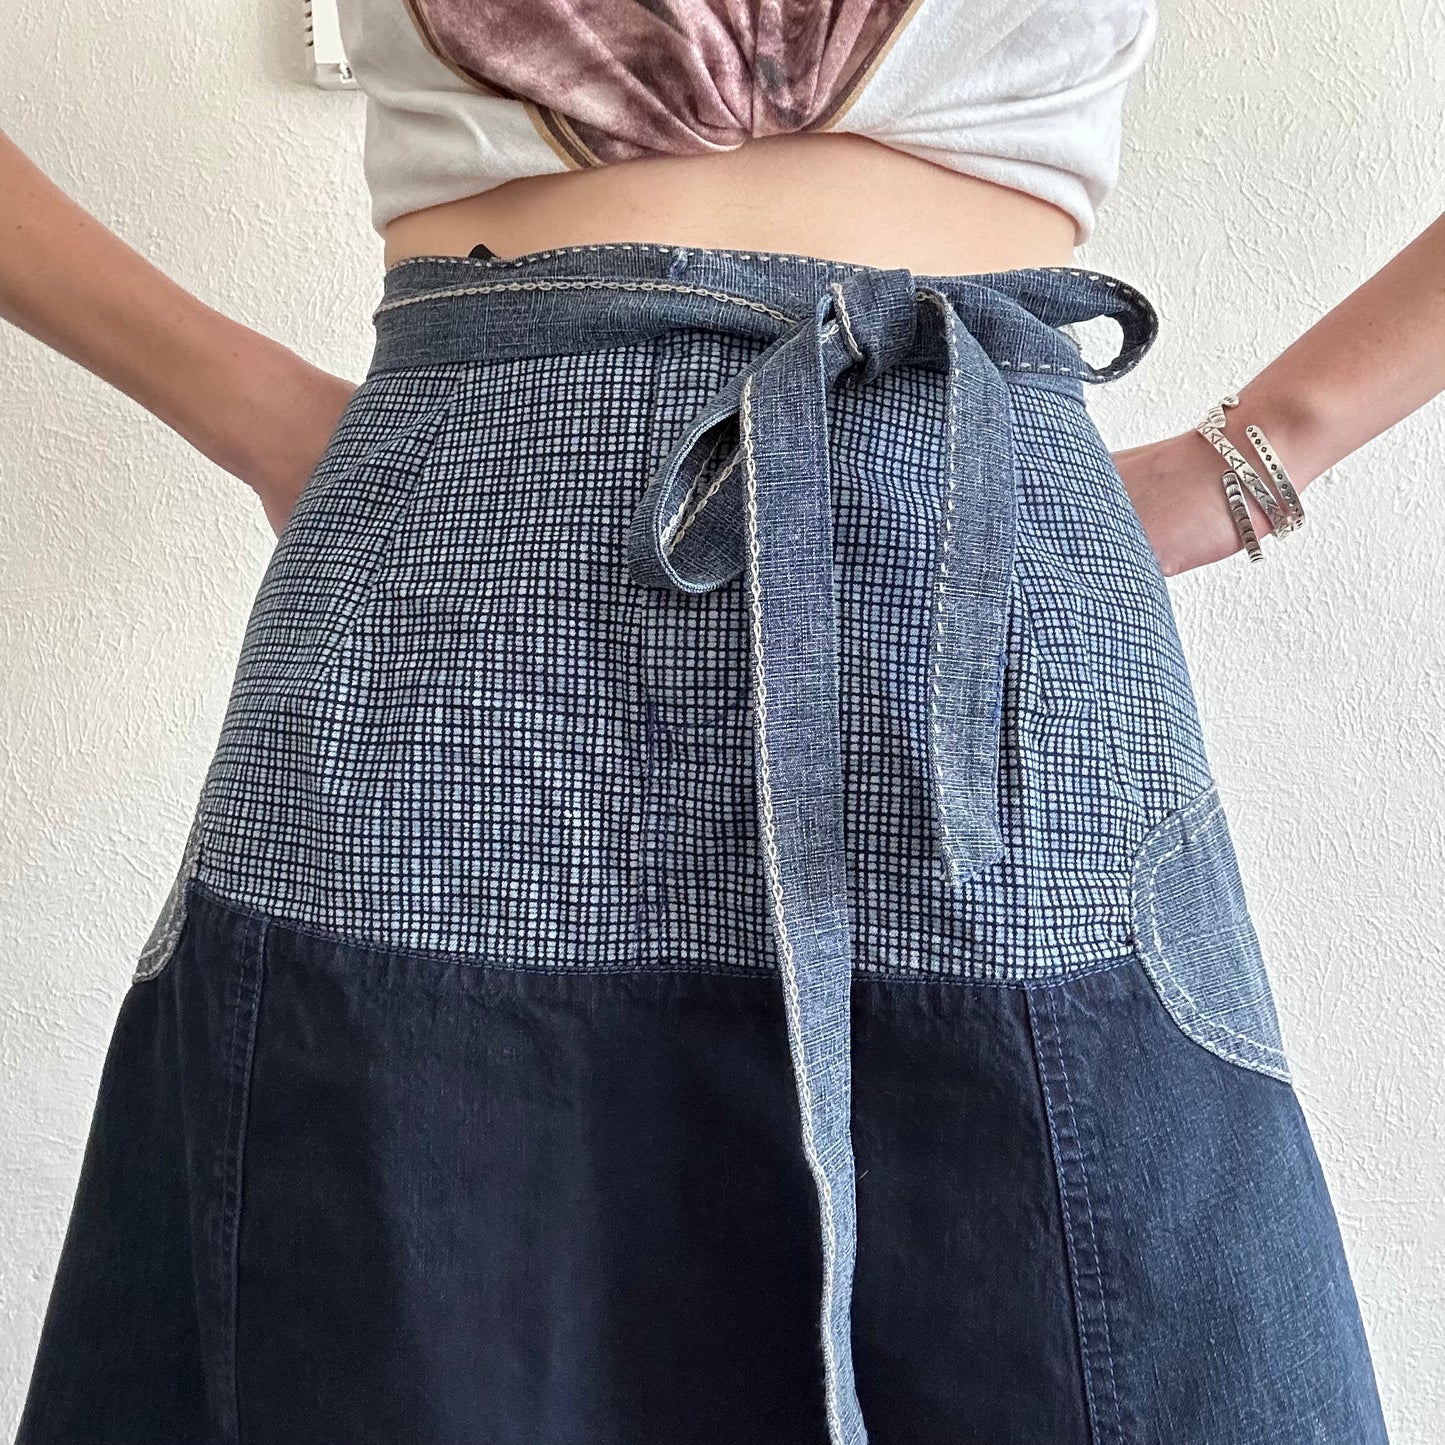 90'S VINTAGE GIRBAUD PATCH SKIRT // SIZE SMALL